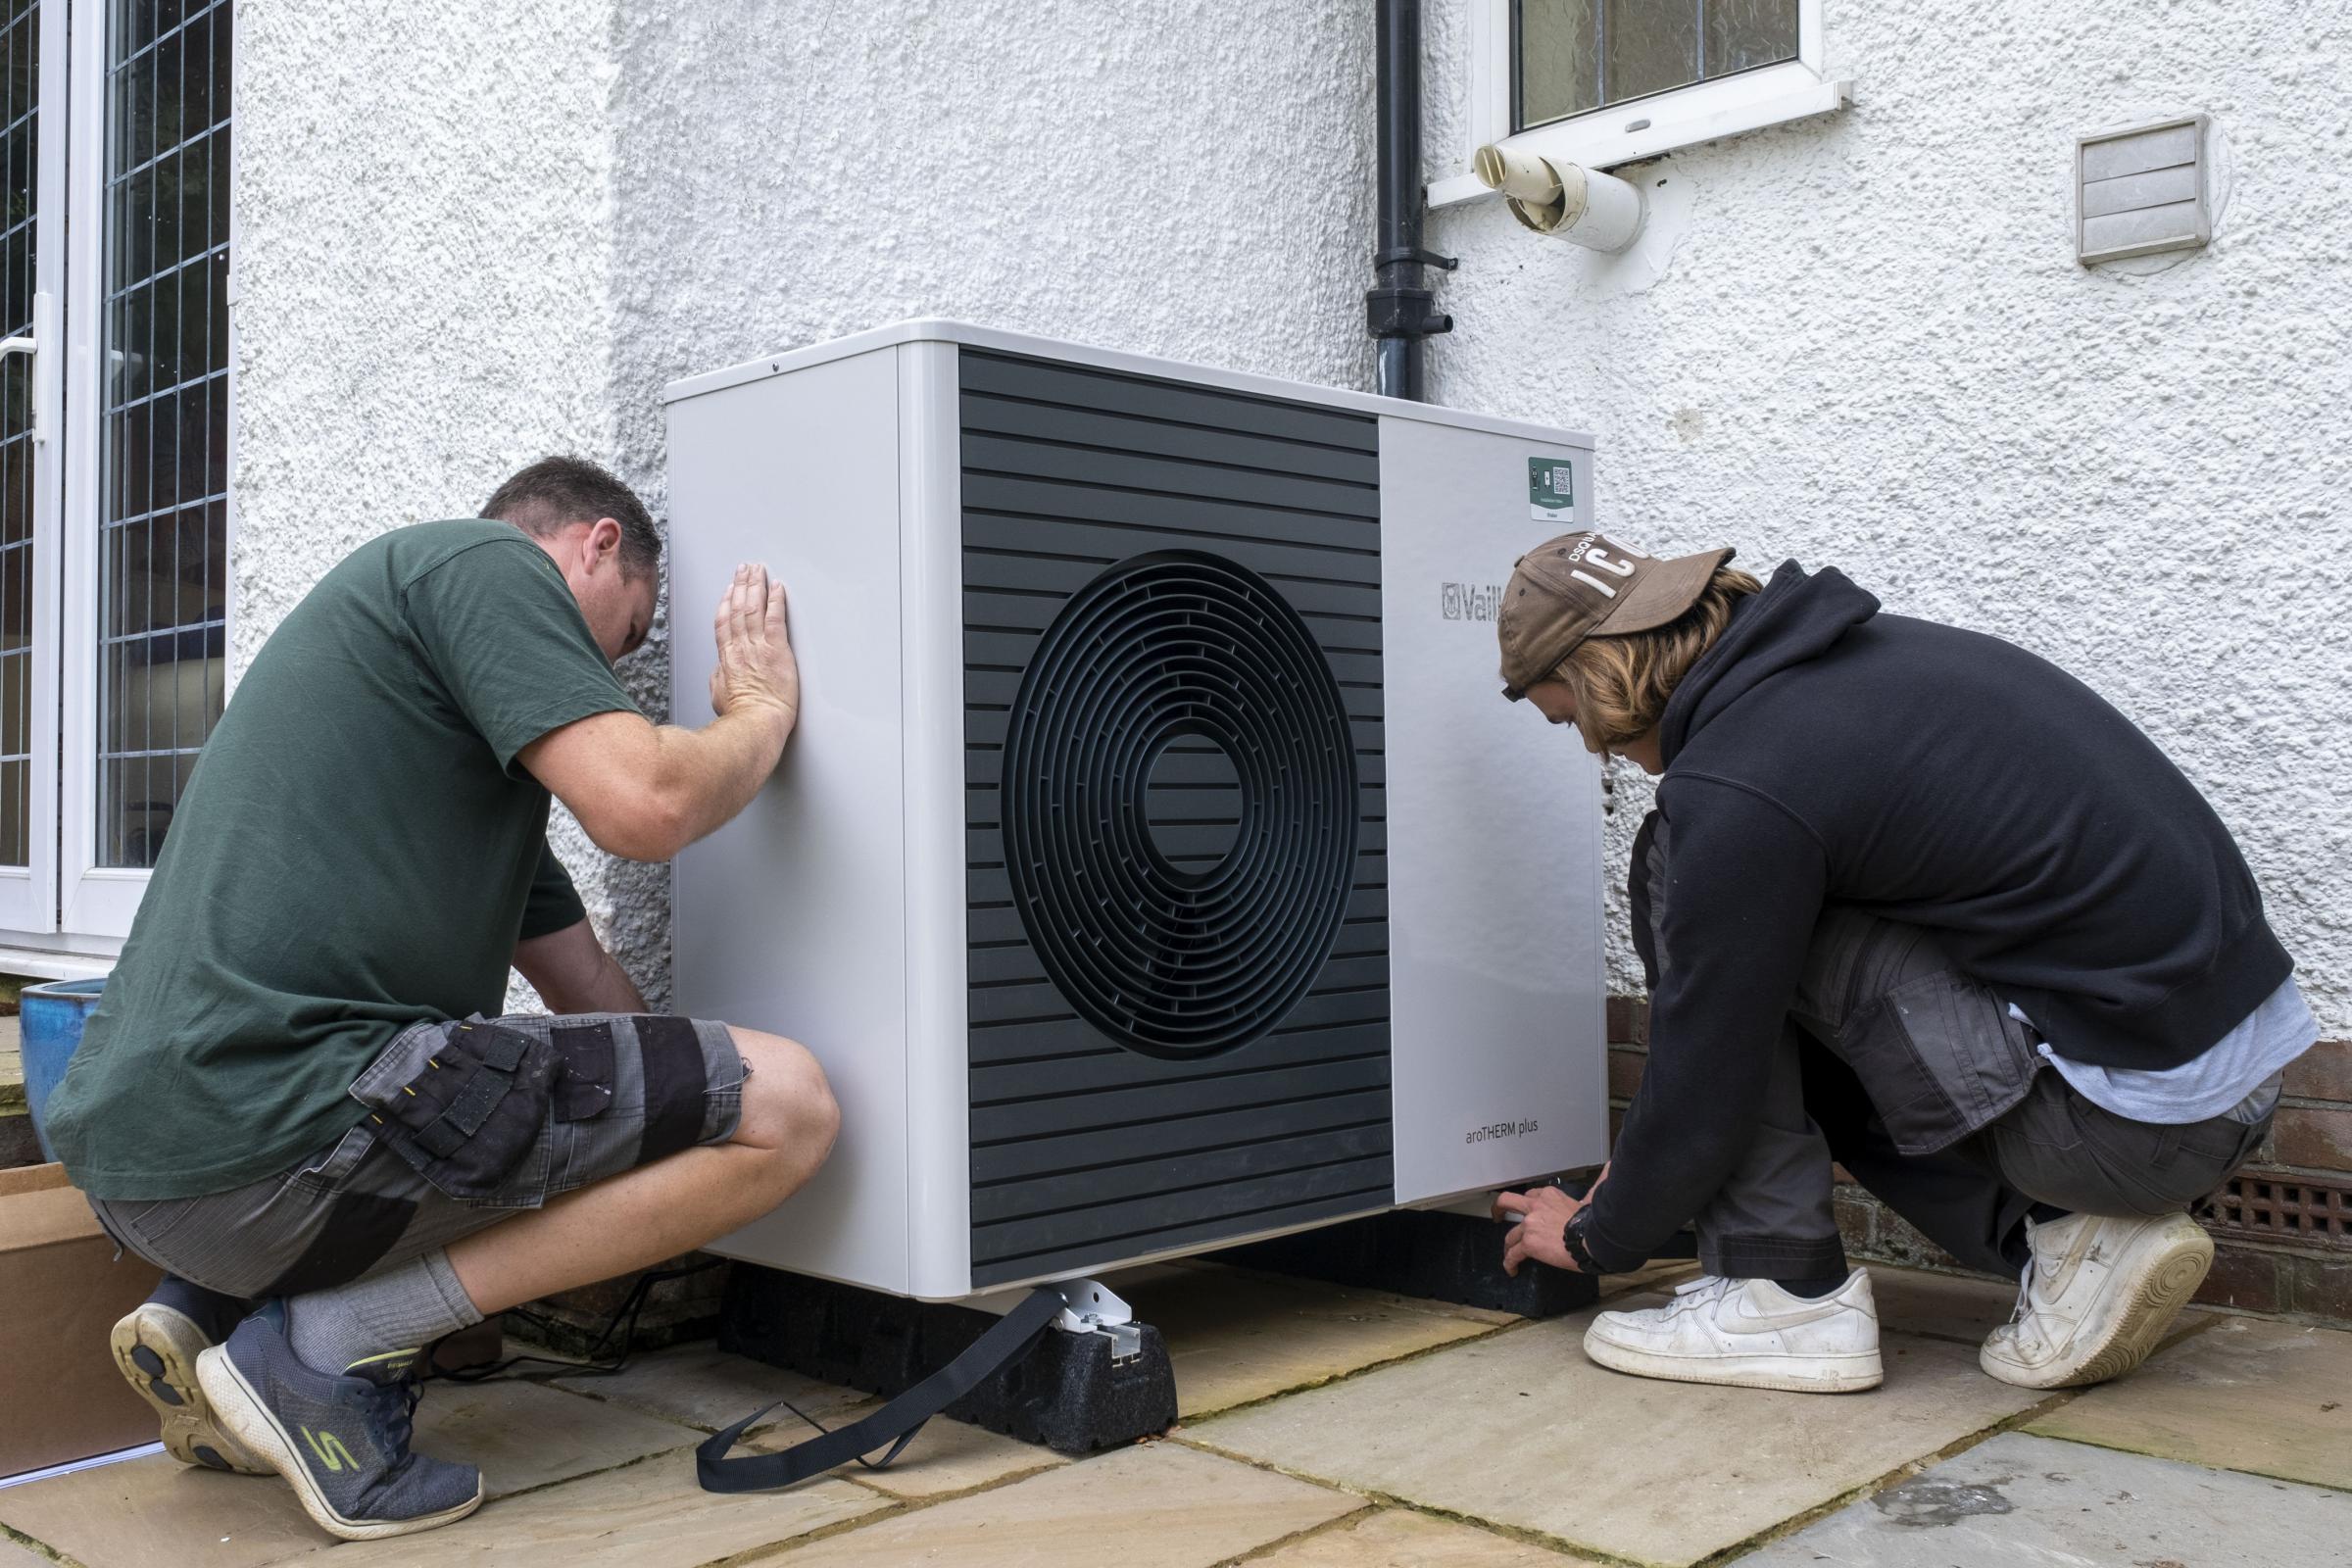 Air source heat pump installers from Solaris Energy installing a Vaillant Arotherm plus 7kw air source heat pump unit into a 1930s built house in Folkestone, United Kingdom on the 20th of September 2021. With gas prices increasing and the increasing